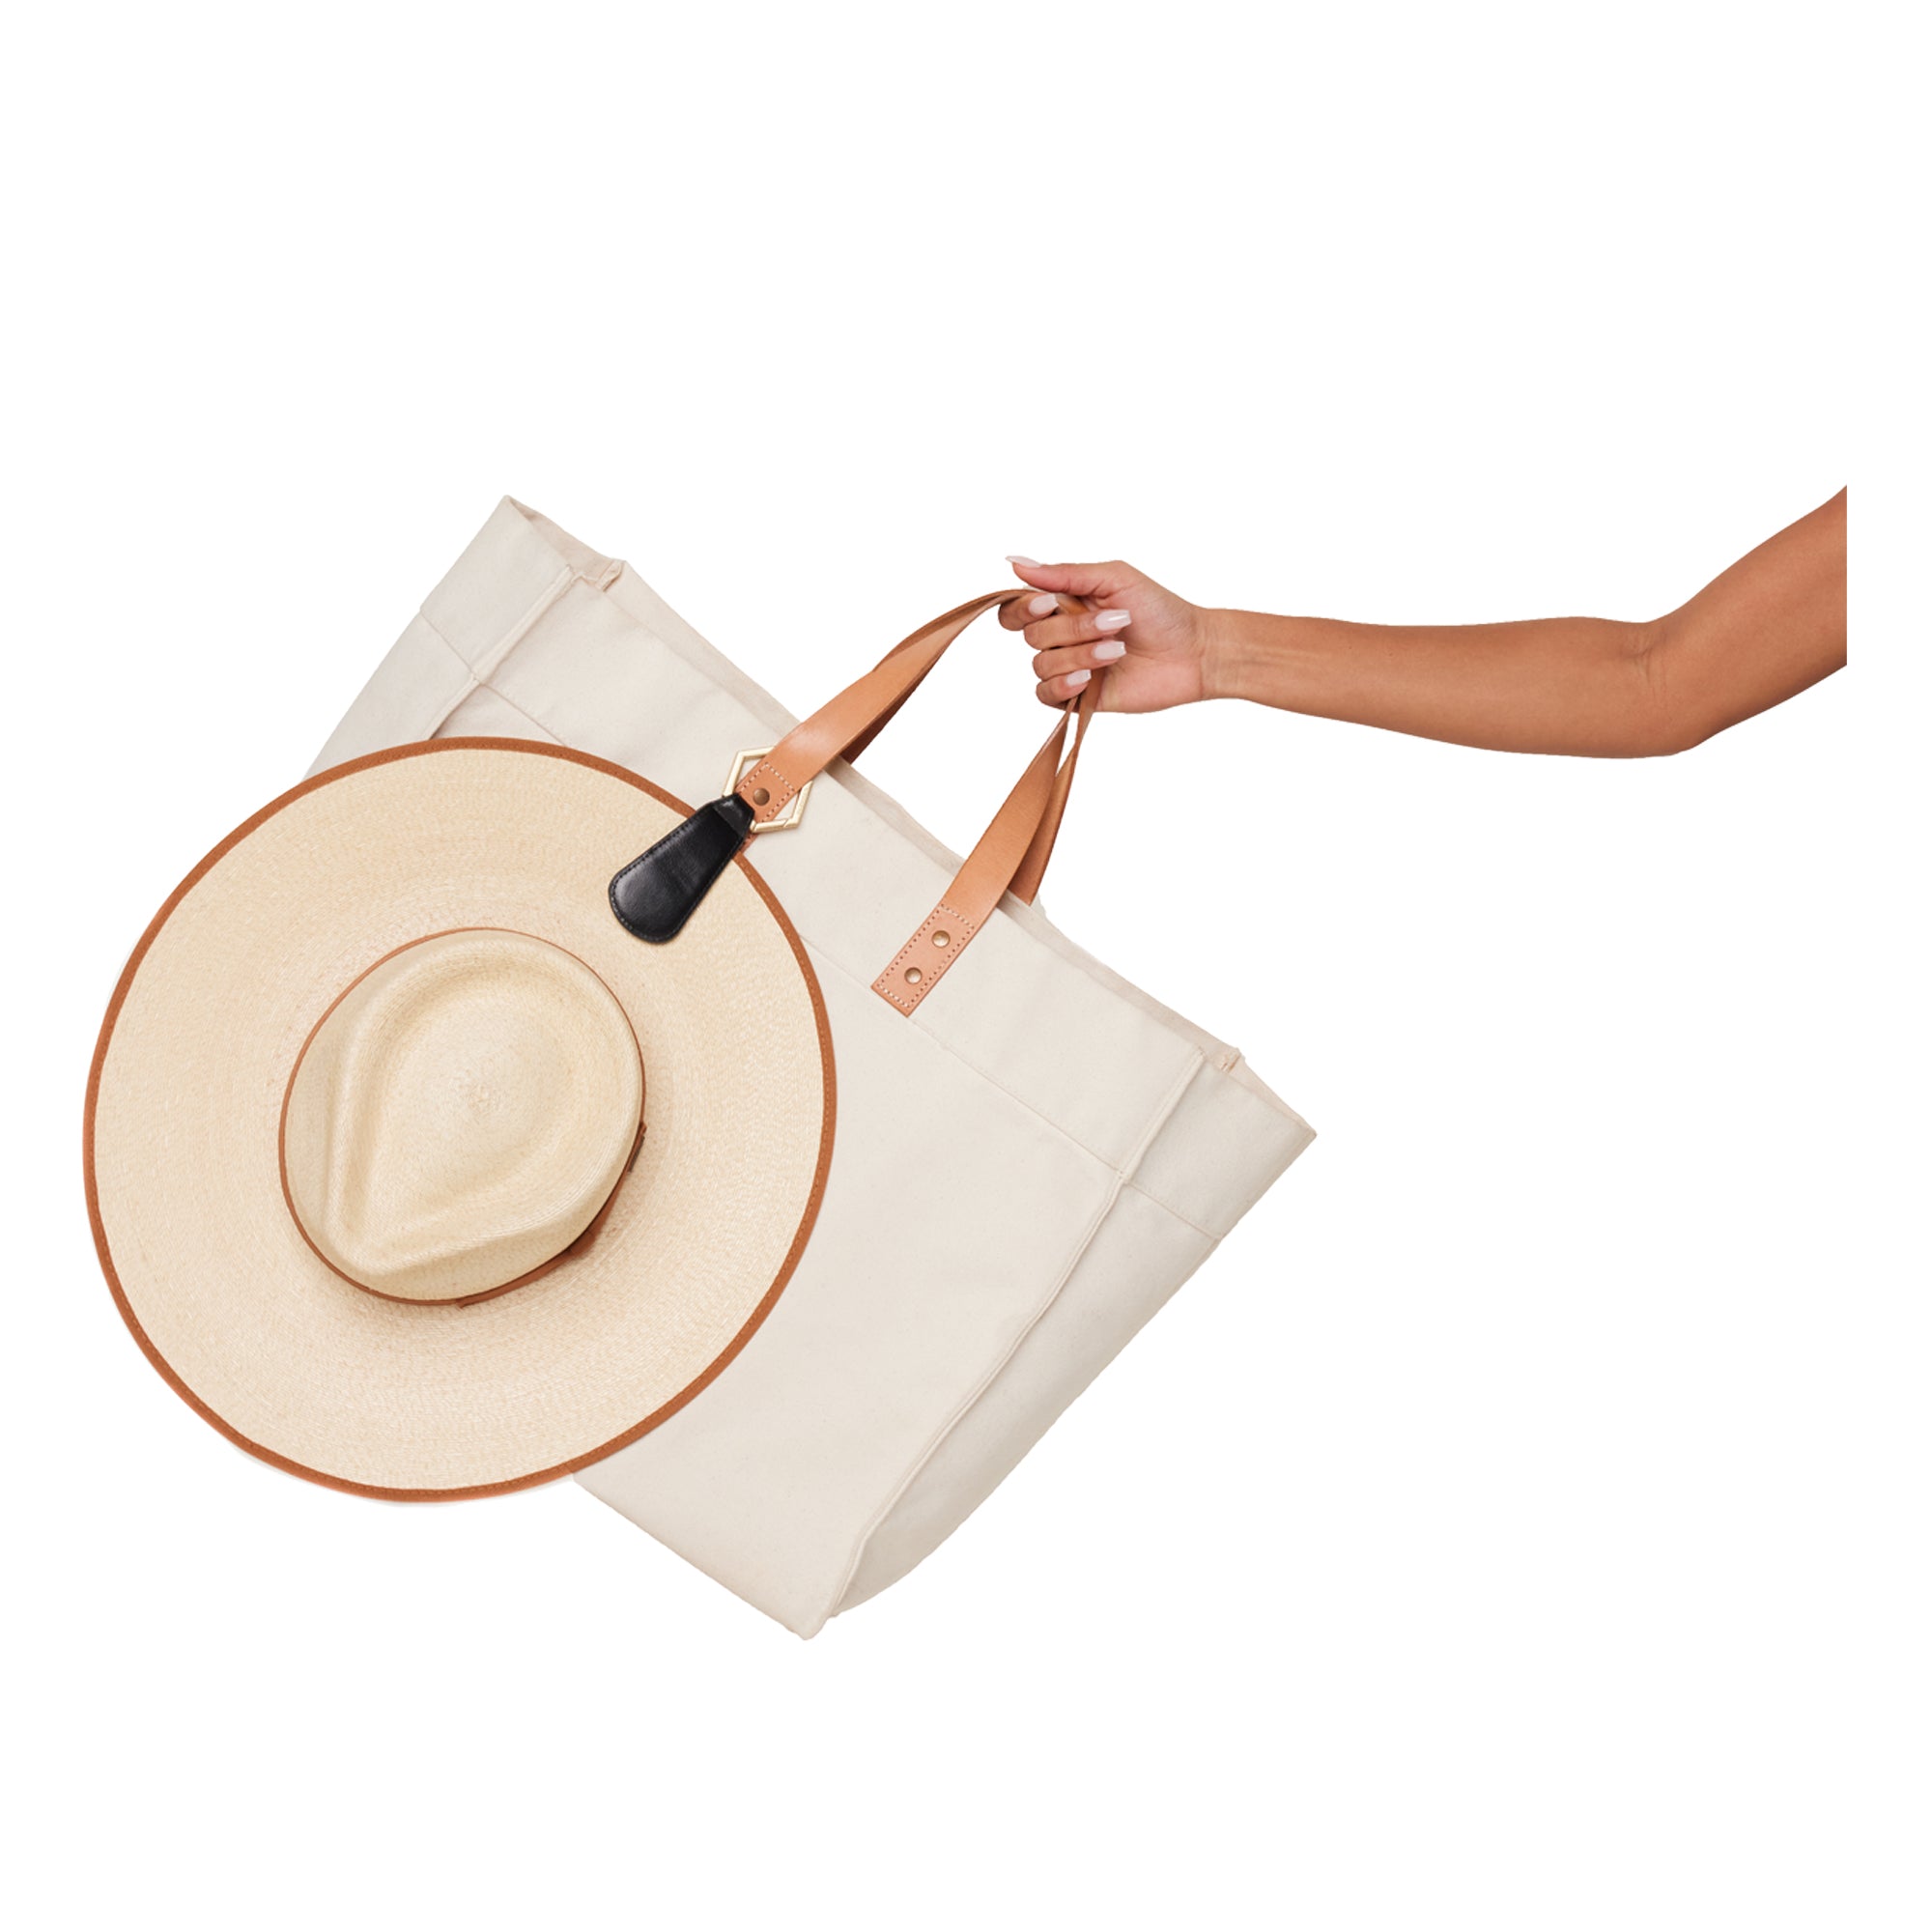 The Drop TOPTOTE hat clip made in faux leather with gold hardware attaches to your bag strap and carries your hat